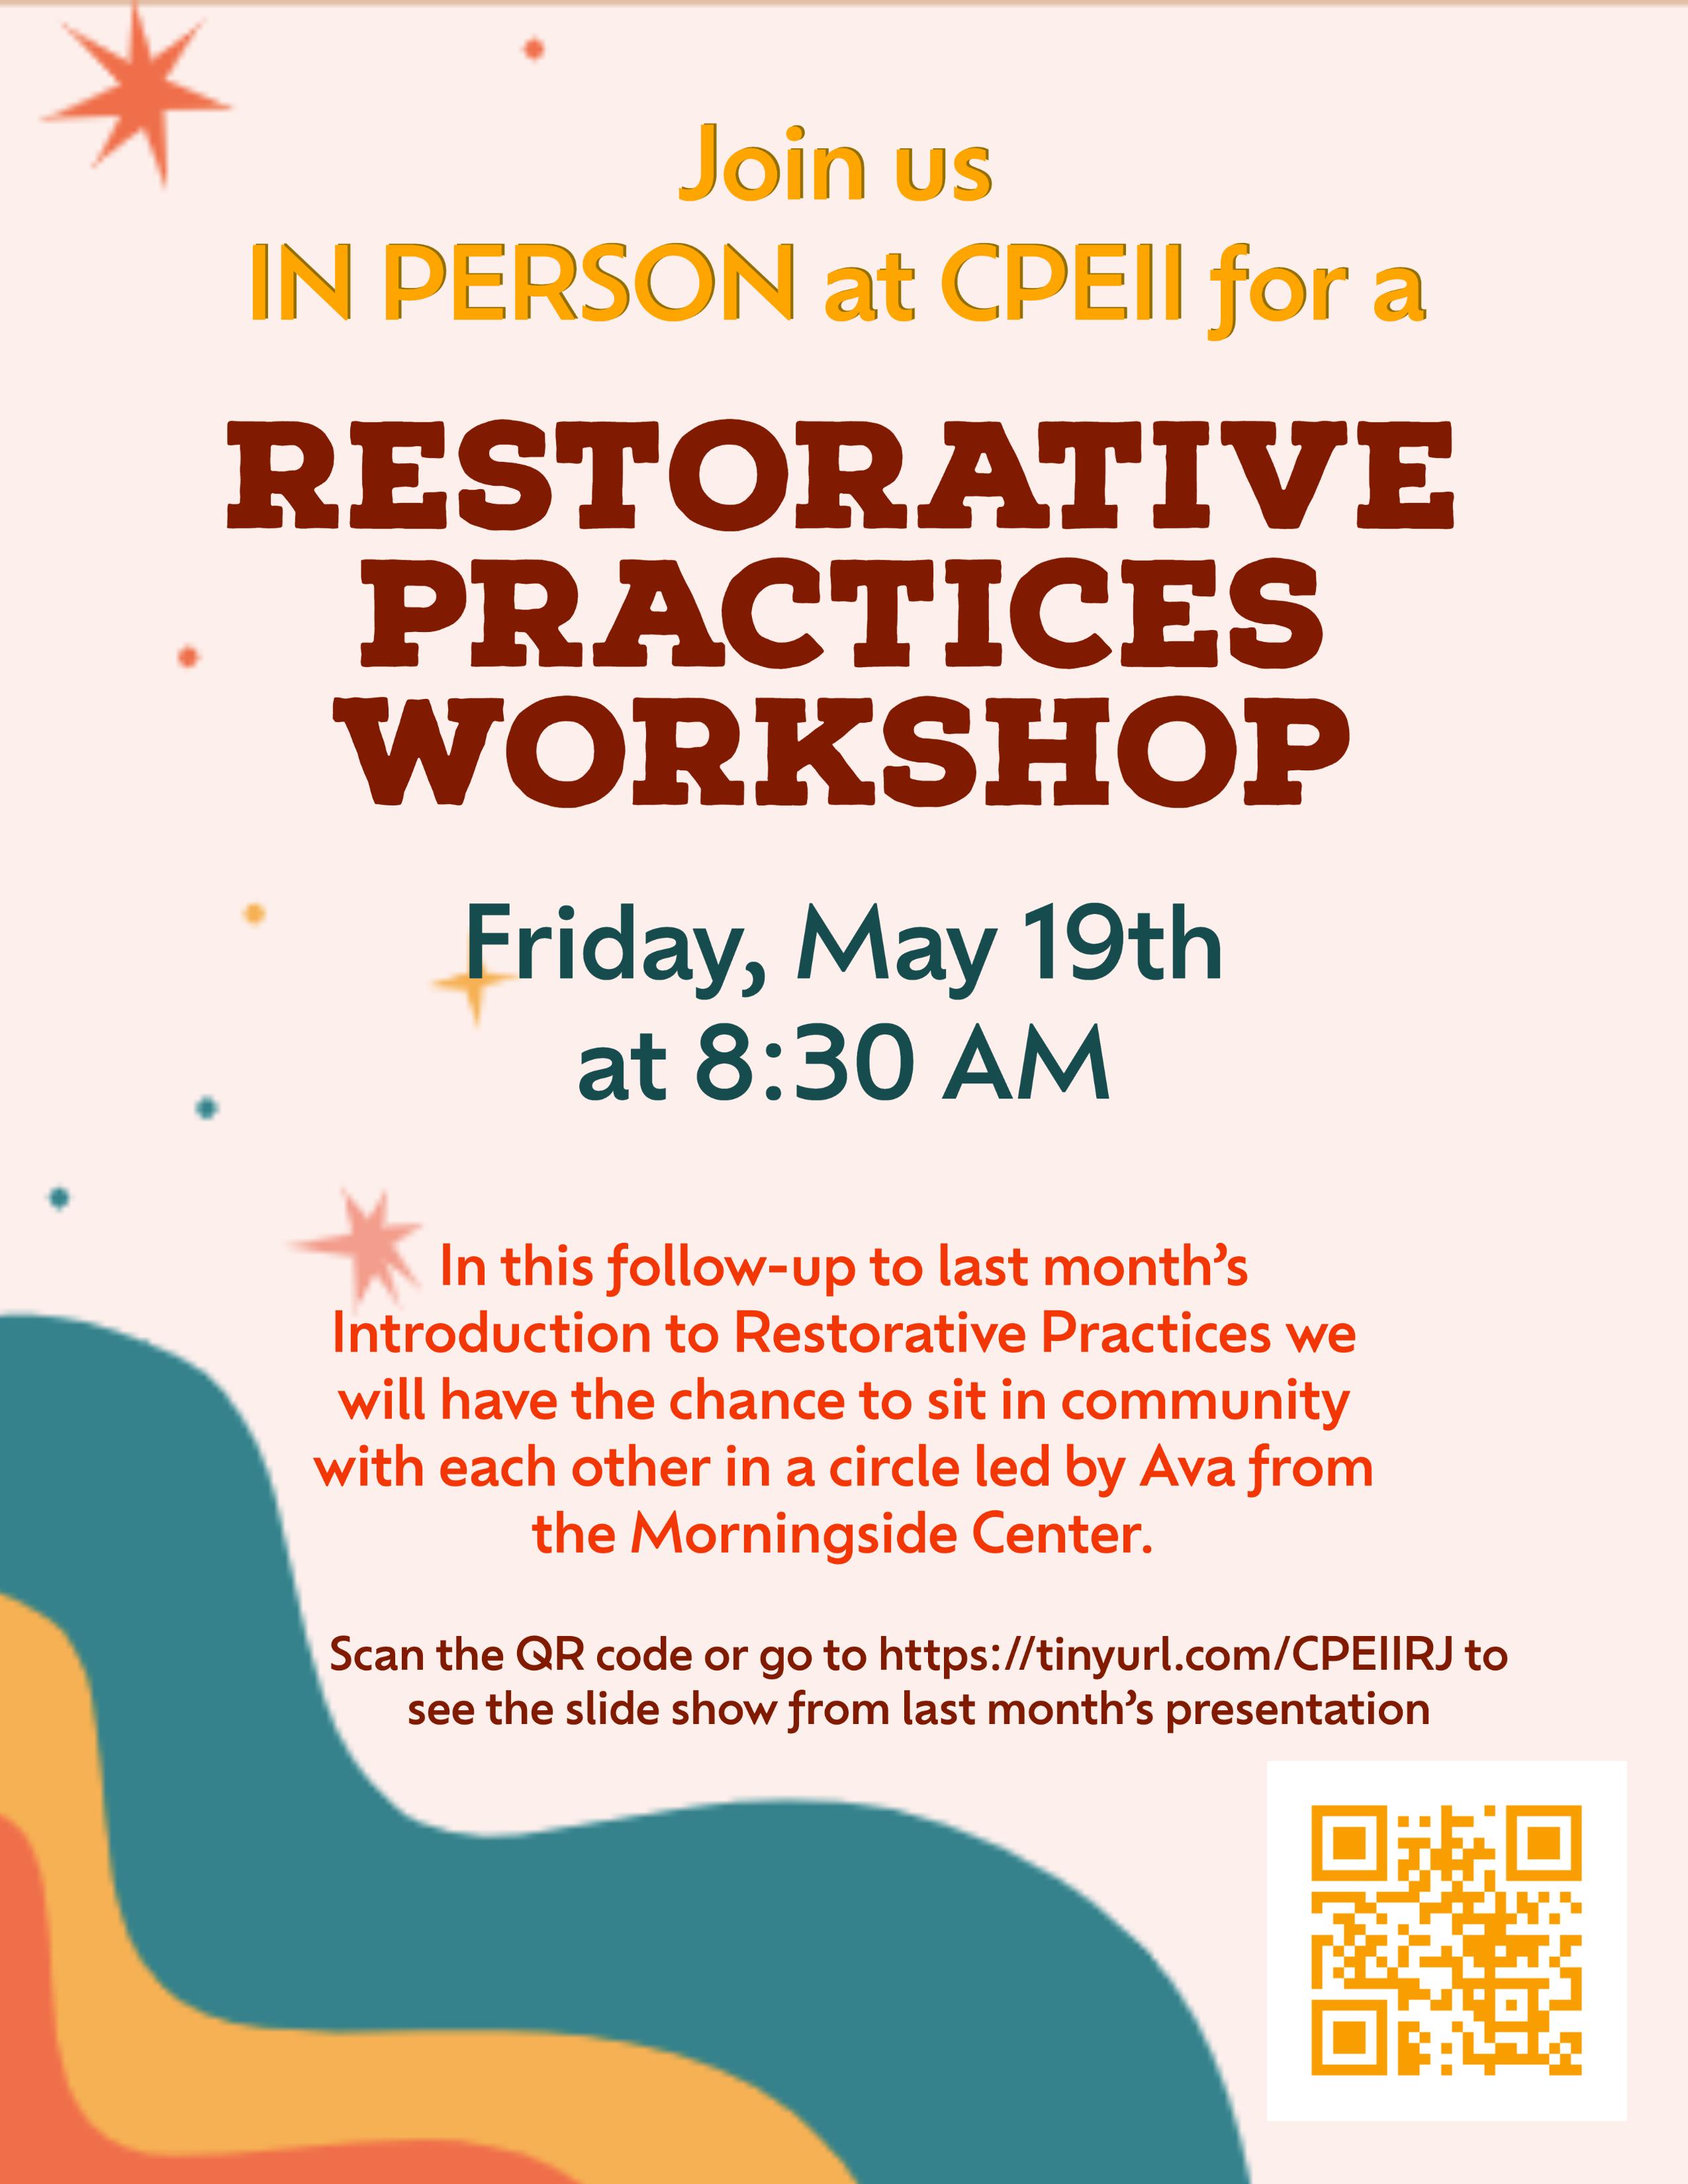 Join us in person at CPEII for a restorative practice workshop. Friday, May 19th at 8:30 am In this follow-up to last month’s  Introduction to Restorative Practices we will have the chance to sit in community with each other in a circle led by Ava from the Morningside Center. Scan the QR code or go to https://tinyurl.com/CPEIIRJ to see the slide show from last month’s presentation